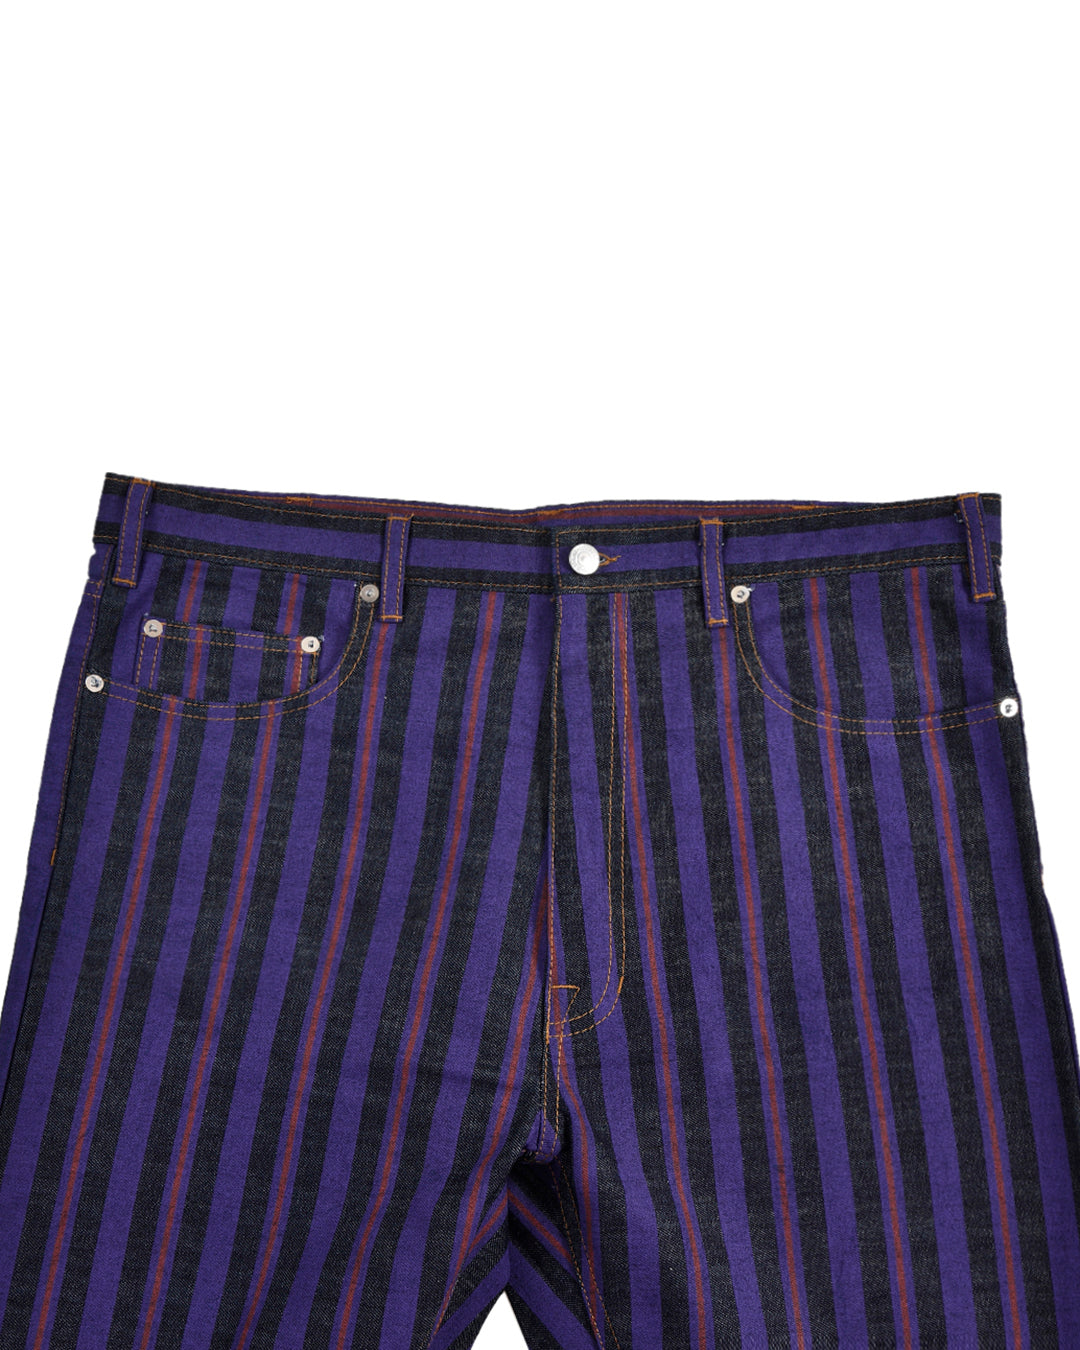 Front view of custom denim jeans for men by Luxire with purple stripes